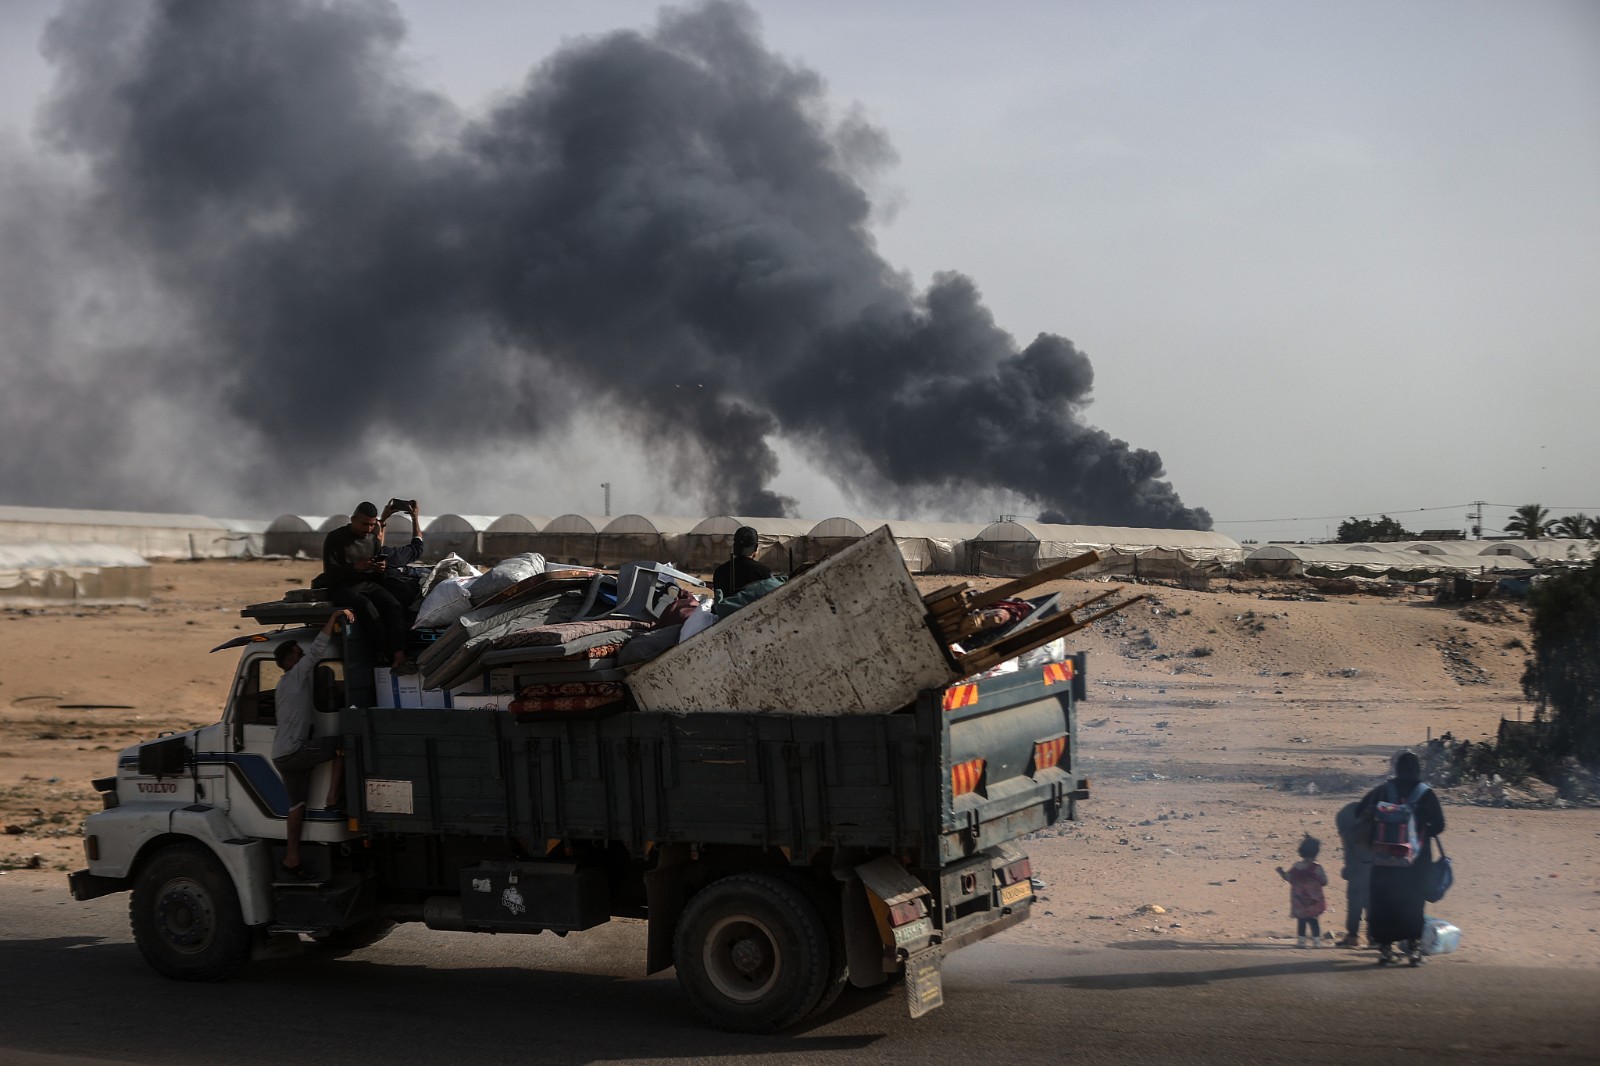 Palestinians flee after the Israeli army targeted tents in Al-Mawasi, previously declared a 